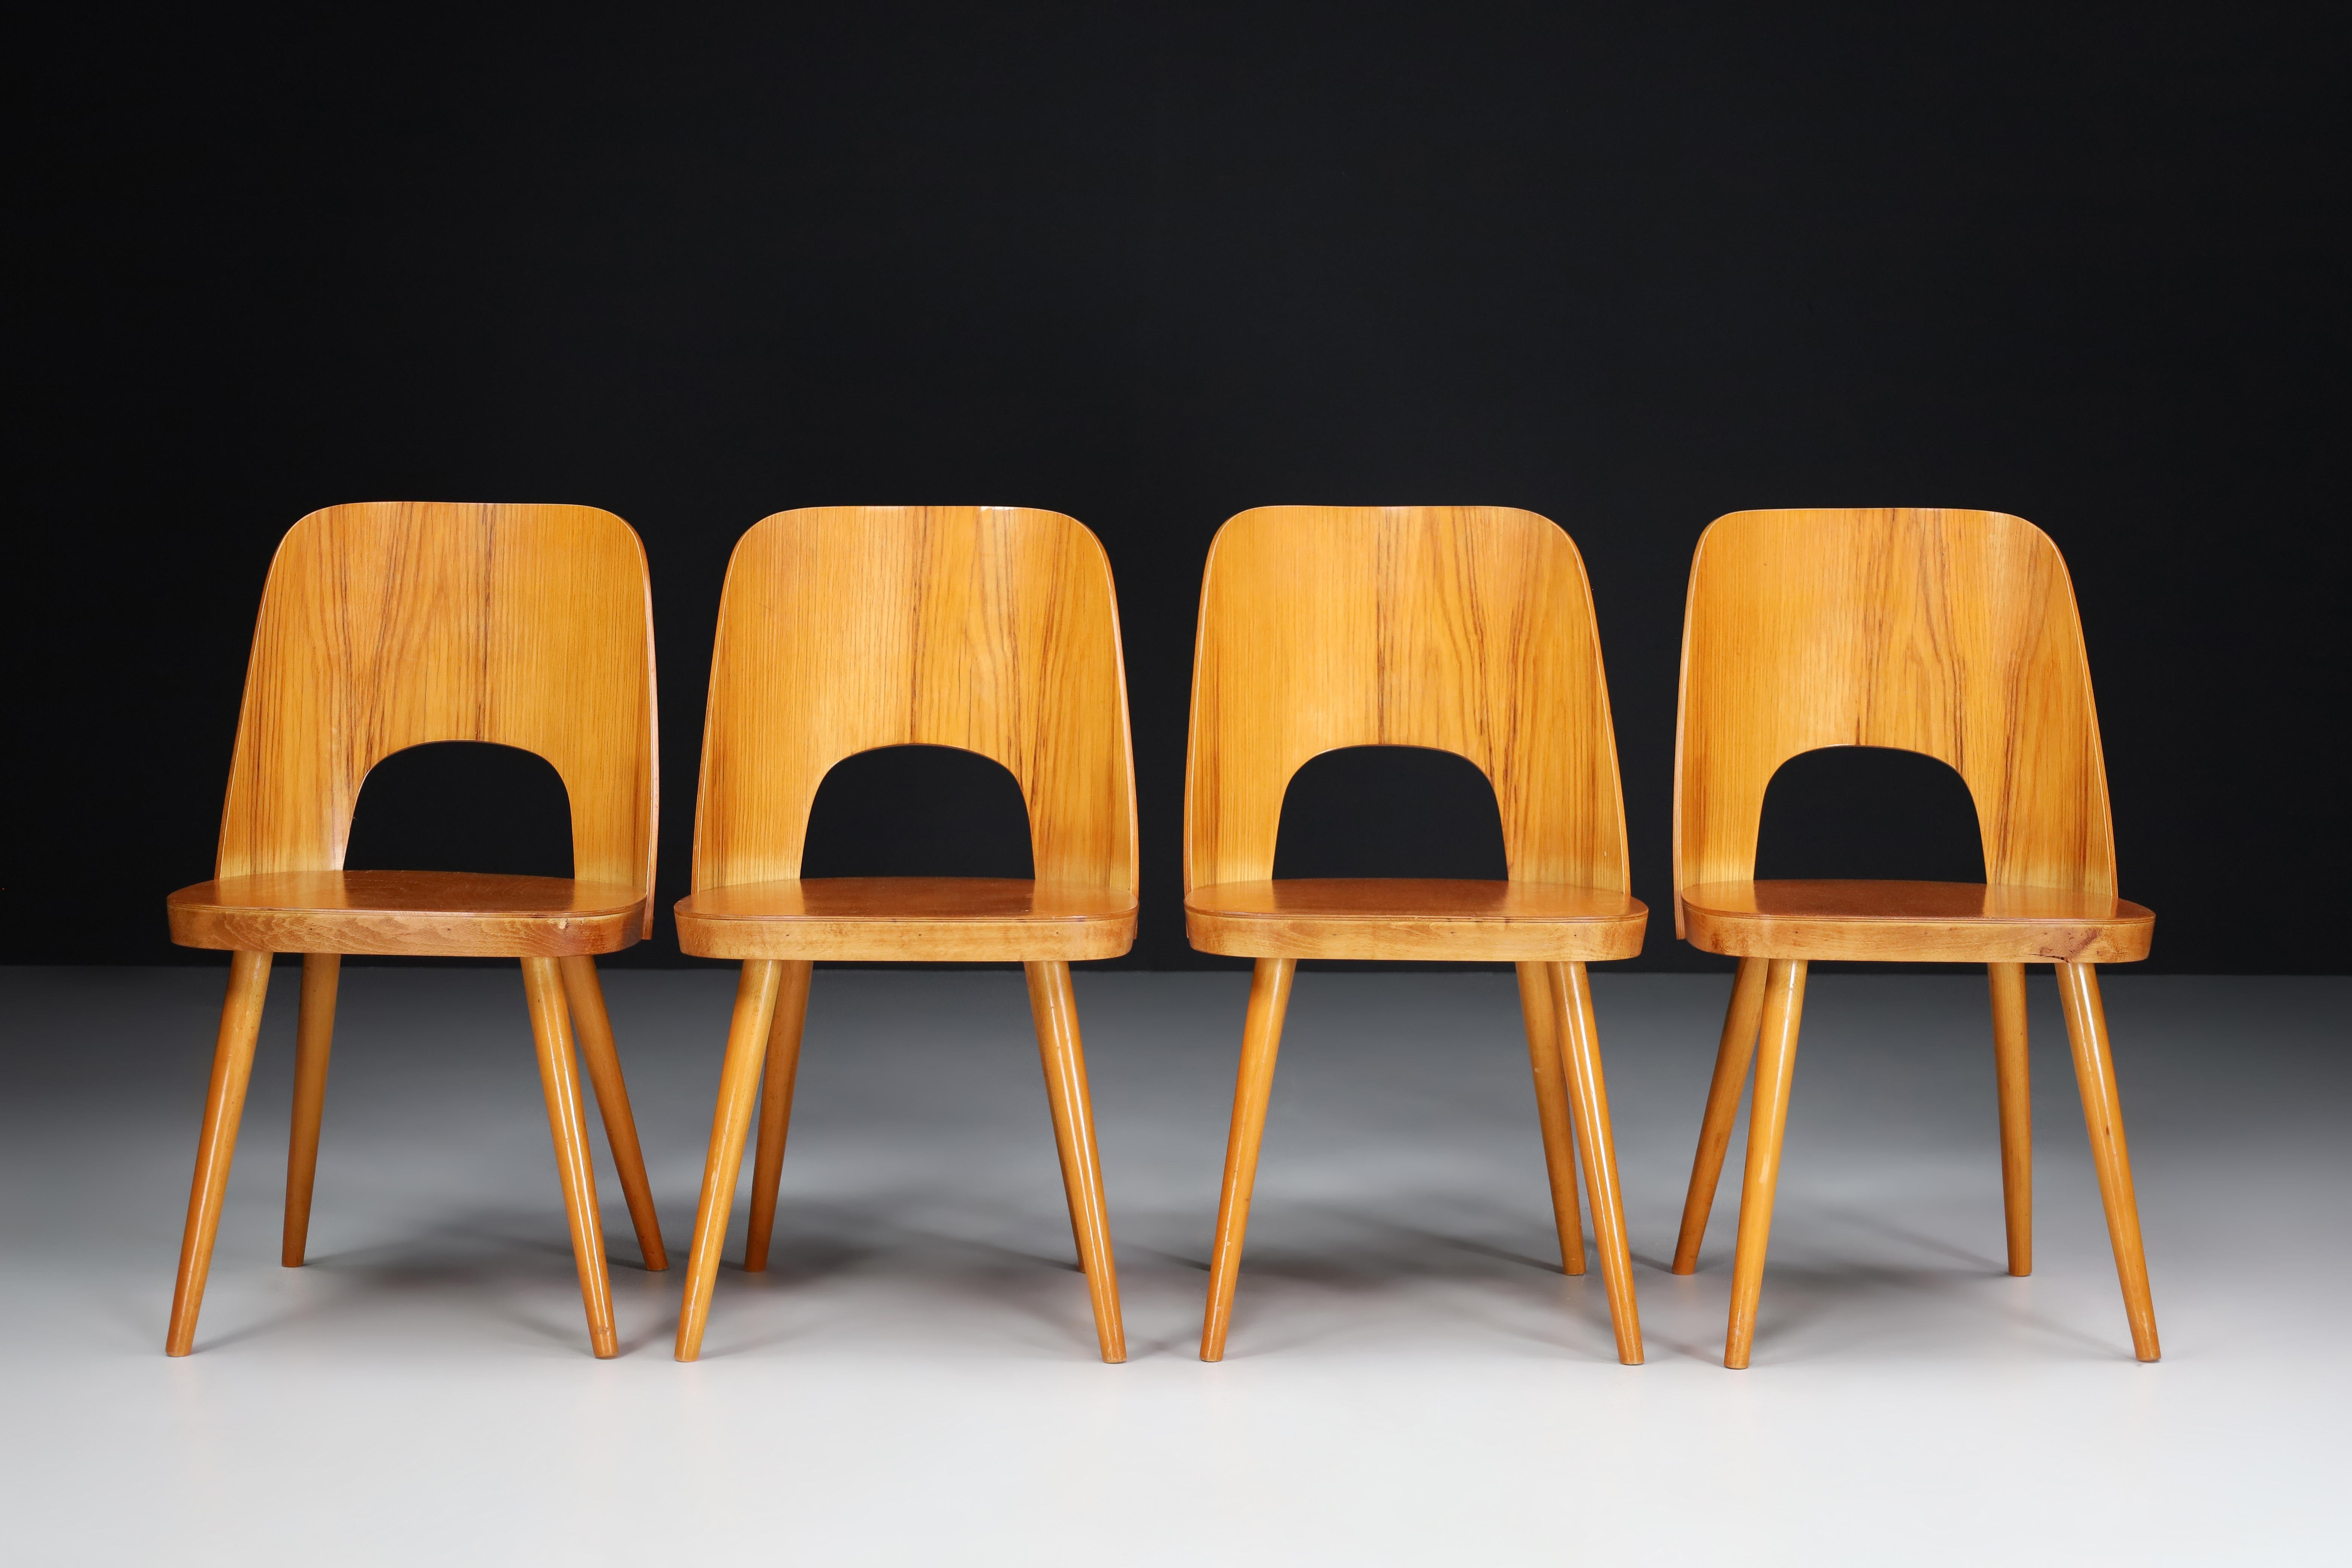 Oswald Haerdtl set of four chairs, the 1950s 

A rare set of four chairs was designed by the Austrian designer Oswald Haerdtl and produced by Ton (Thonet) in the former Czechoslovakia 1950s. Characteristic ash wood chairs, curved backrest, wooden